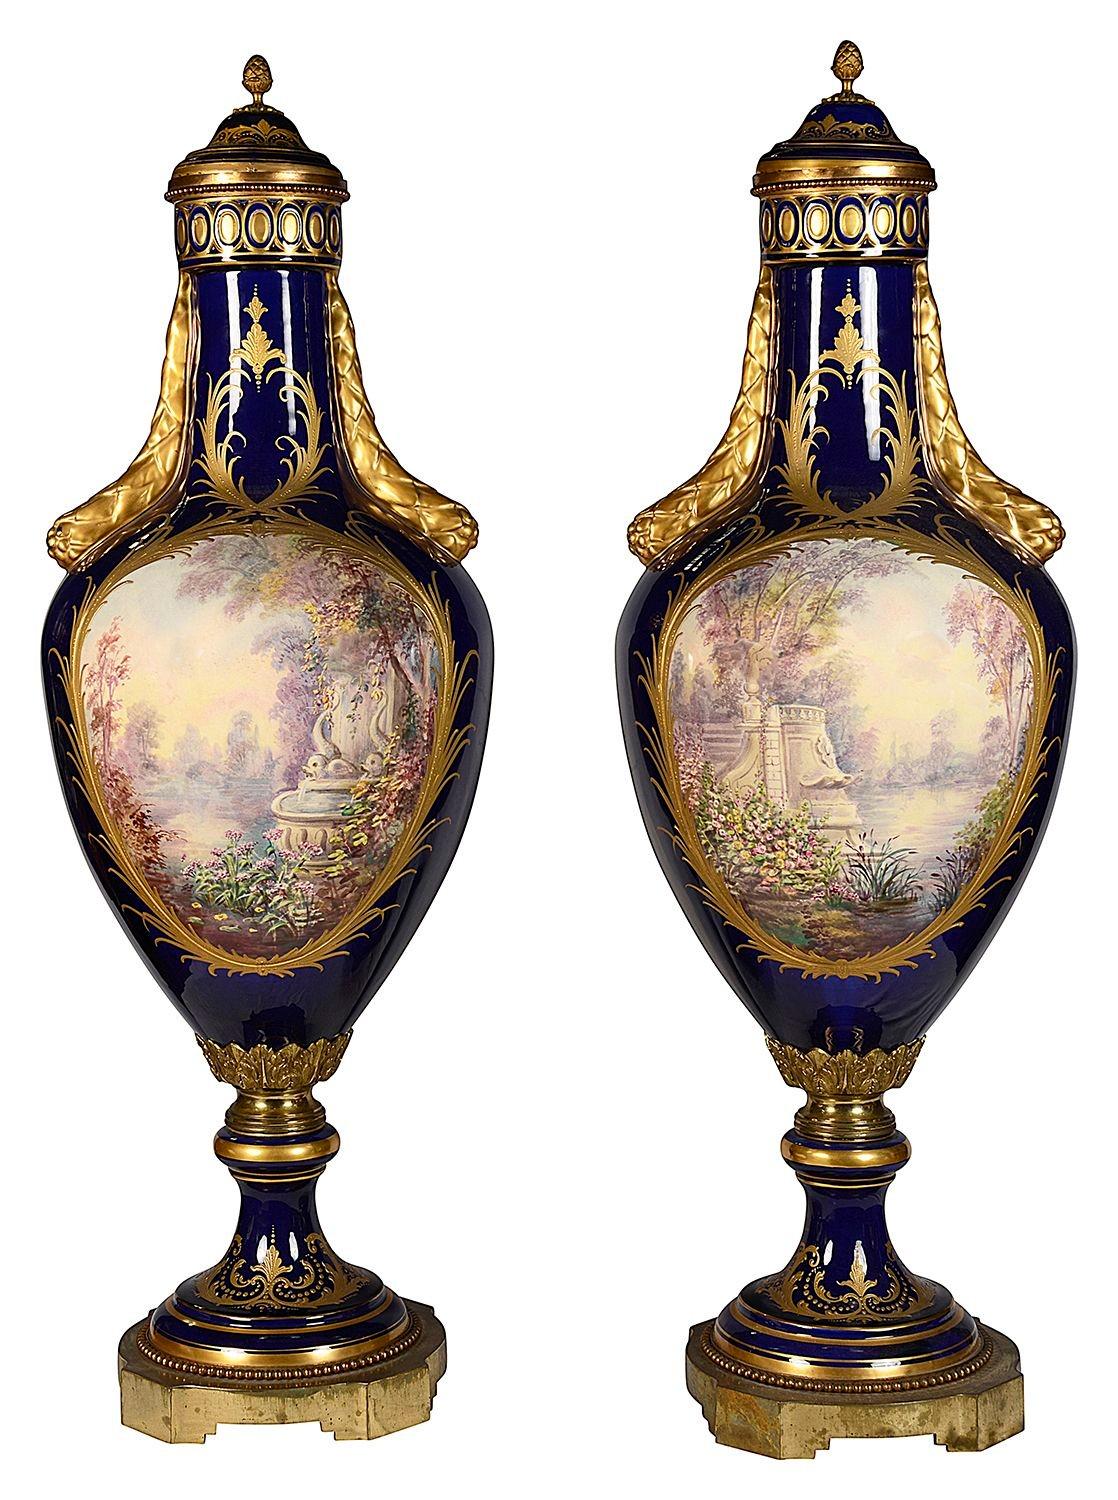 A fine quality pair of French Serves style porcelain lidded vases, each with a cobalt blue ground, wonderful gilded classical highlighted decoration, with inset hand painted romantic scenes of lovers courting, signed 'J.Pascot'
 
 
 
Batch 73 61860